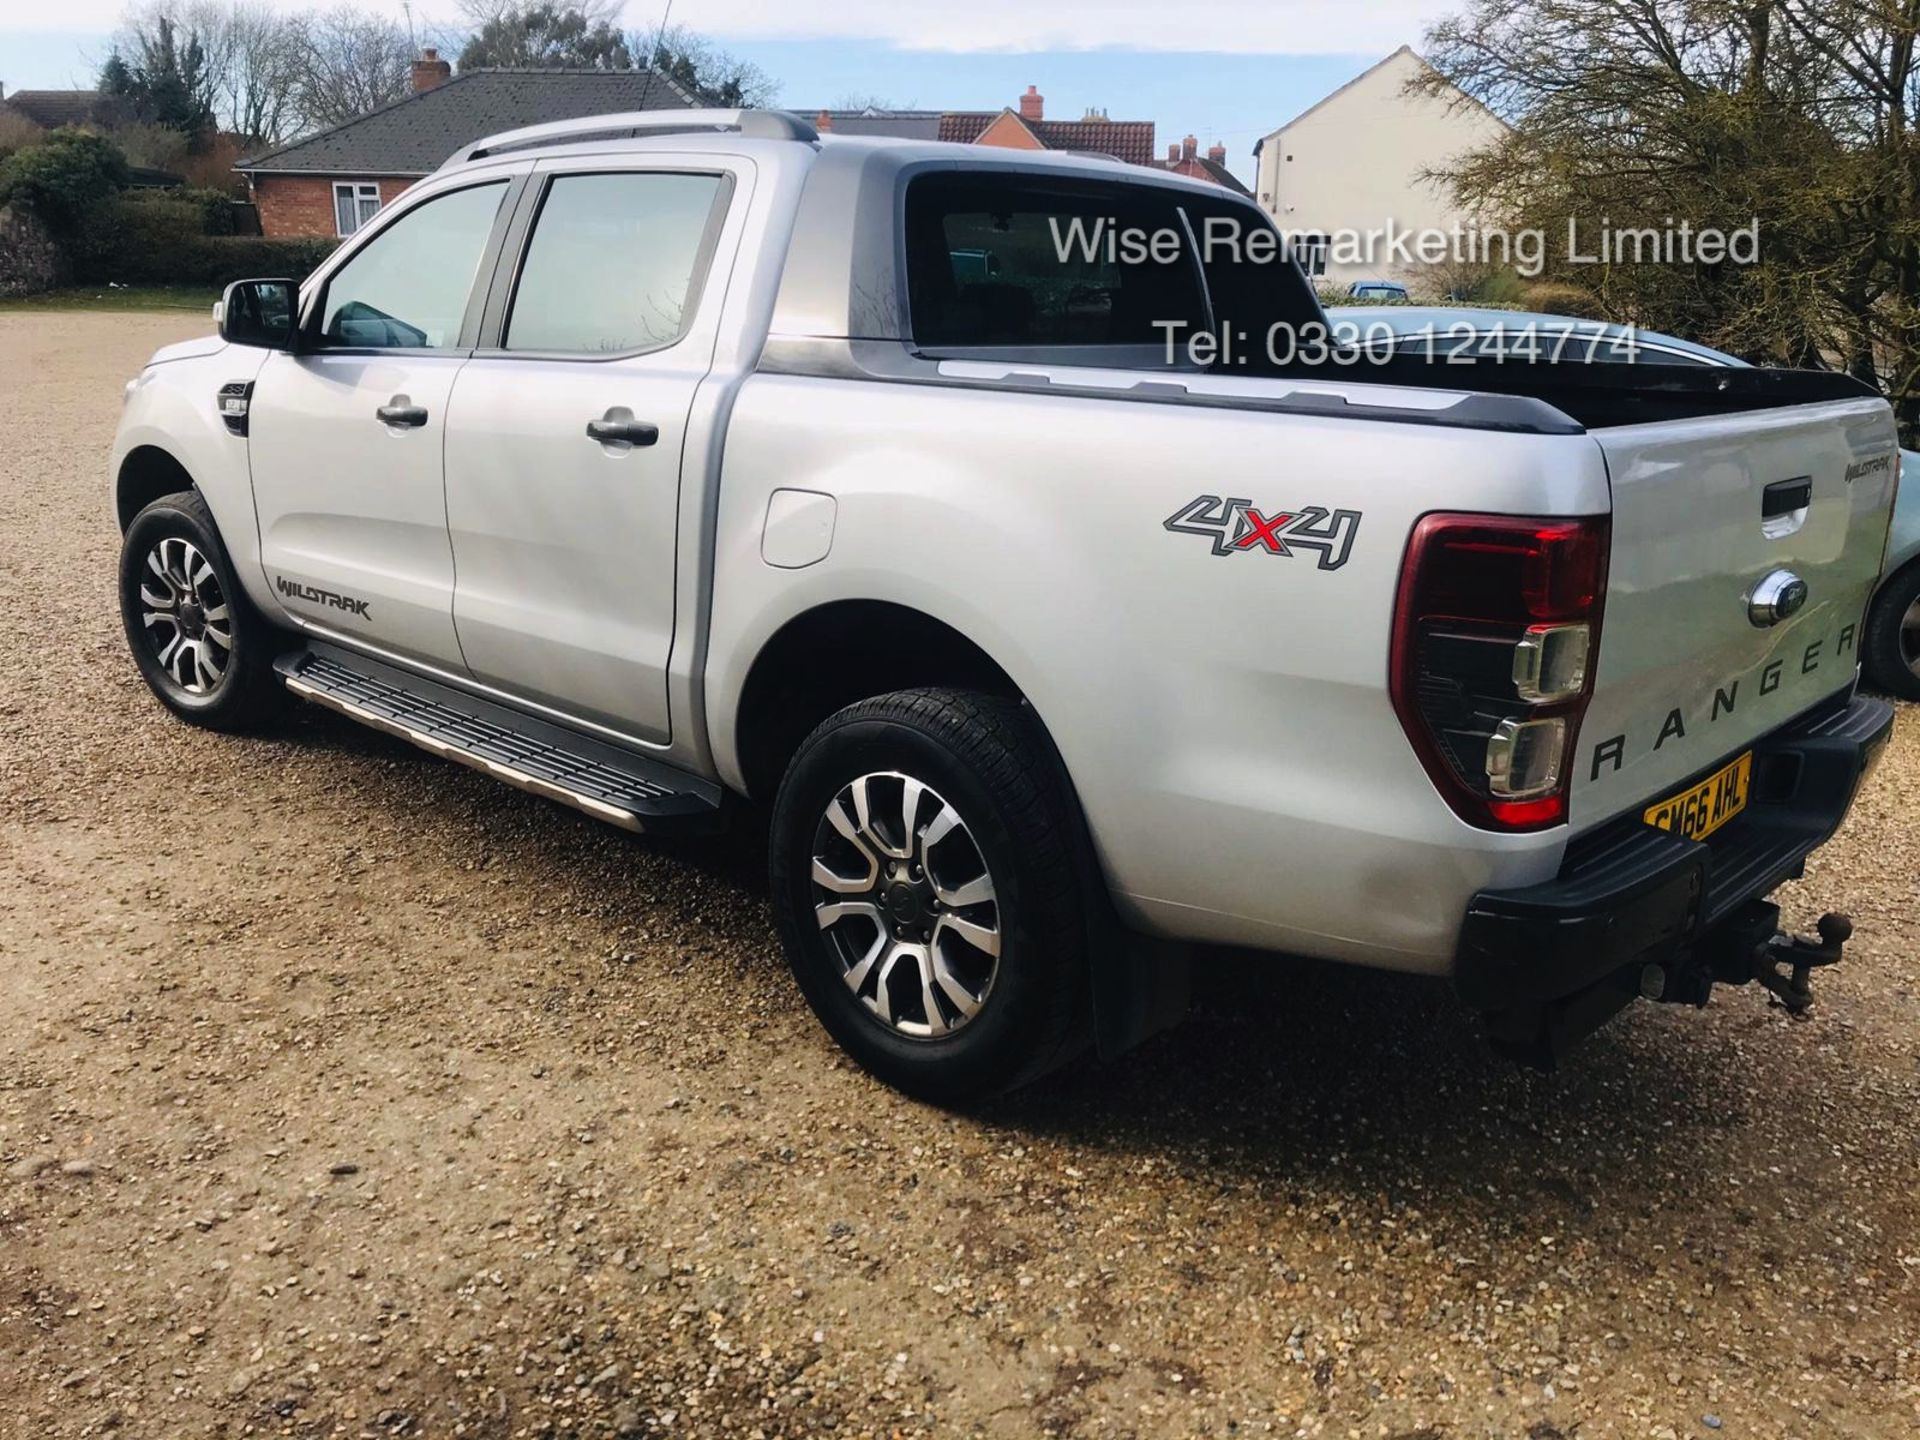 Ford Ranger 3.2 TDCI WILDTRAK - Auto - 2017 Model - 1 Former Keeper - 4x4 - TOP OF THE RANGE - Image 2 of 16